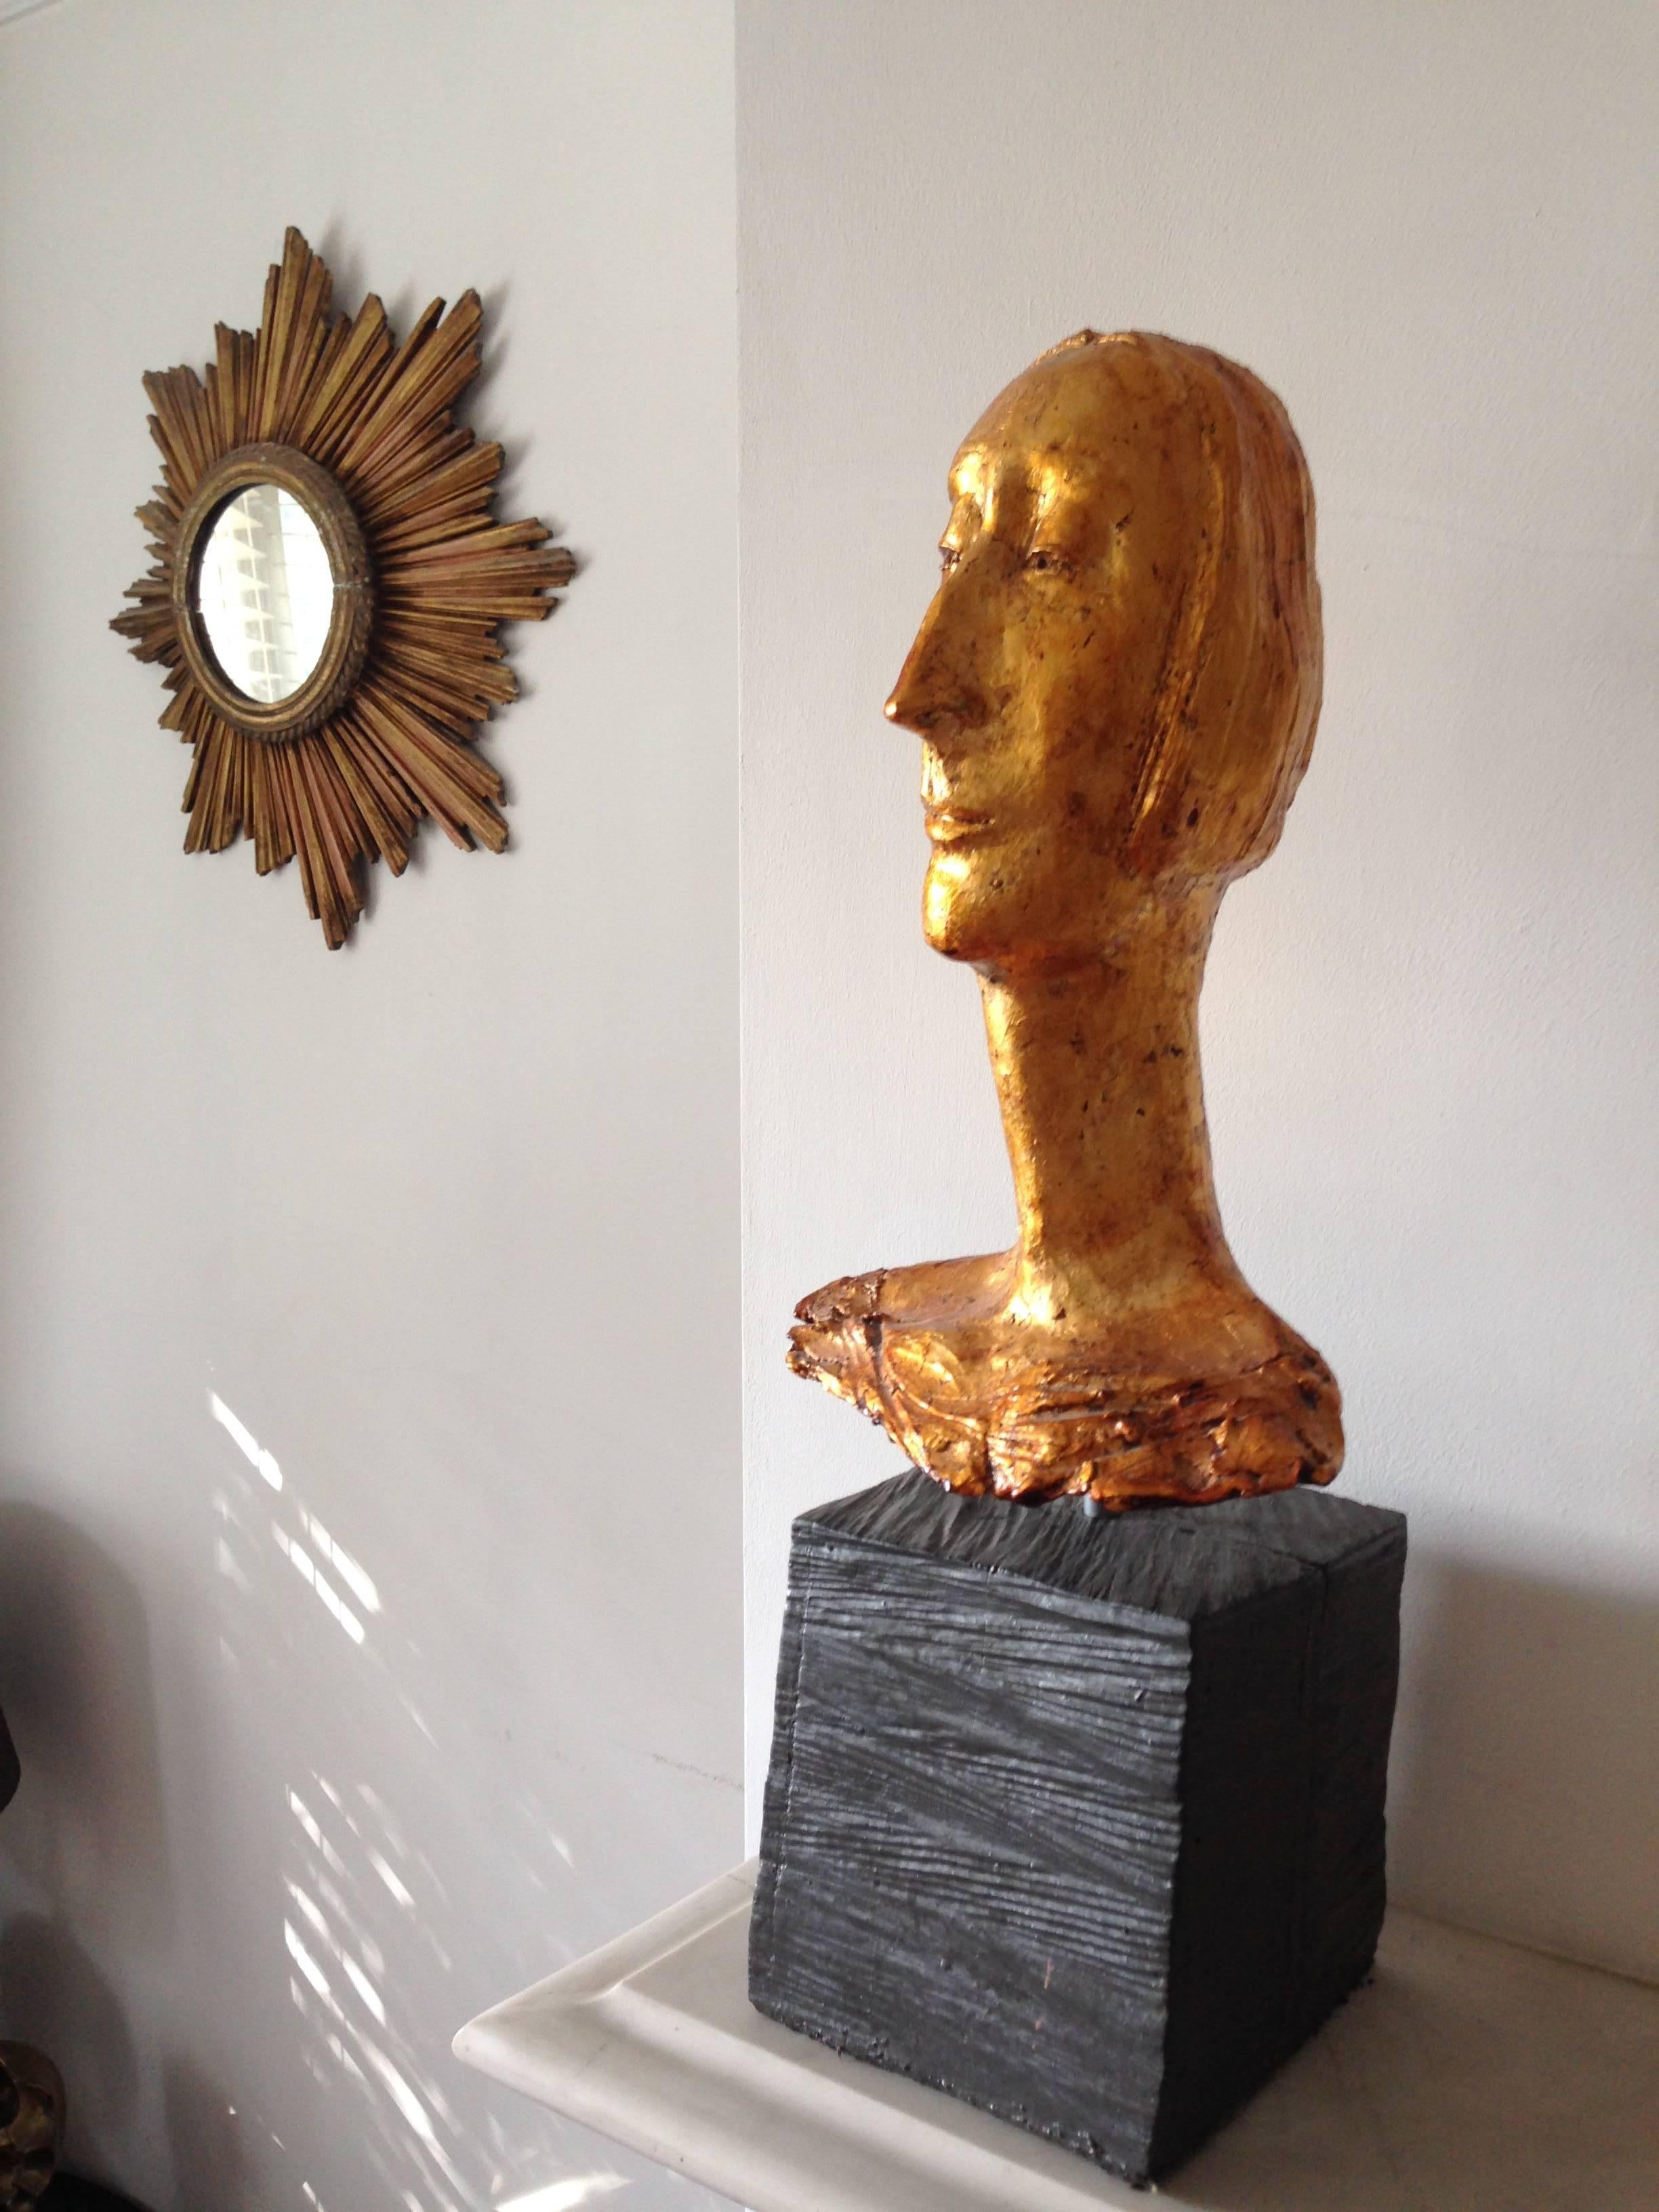 A privately commissioned gilded ceramic sculpture of Edith Sitwell by the British artist Simon Toone. Born 1967.
Toone's sculptures are elegant, gilded and elongated busts reminiscent of Giacometti.
Toone trained at Bristol with some of the greats